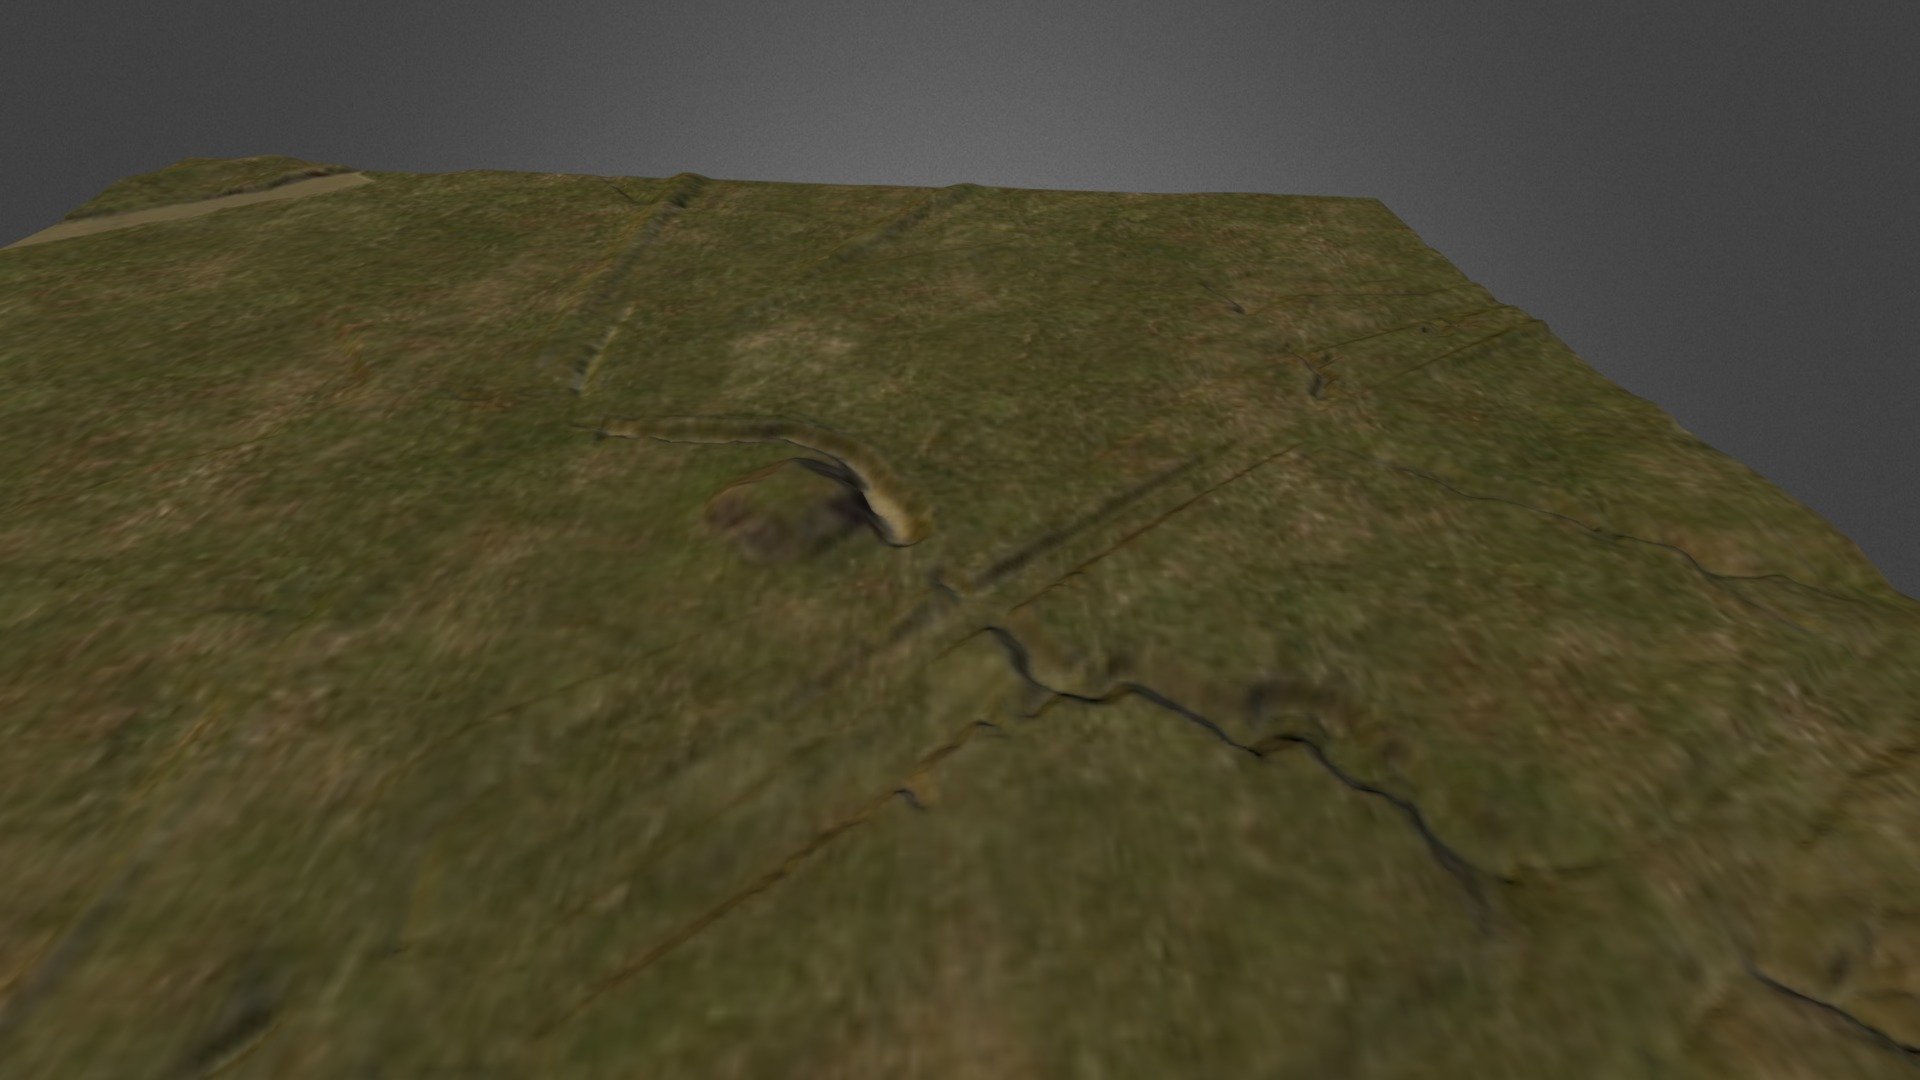 Simple terrain model of Haynes Bluff Mound site in Mississippi. Created in L3DT from DEM data exported from ArcMap 3d model